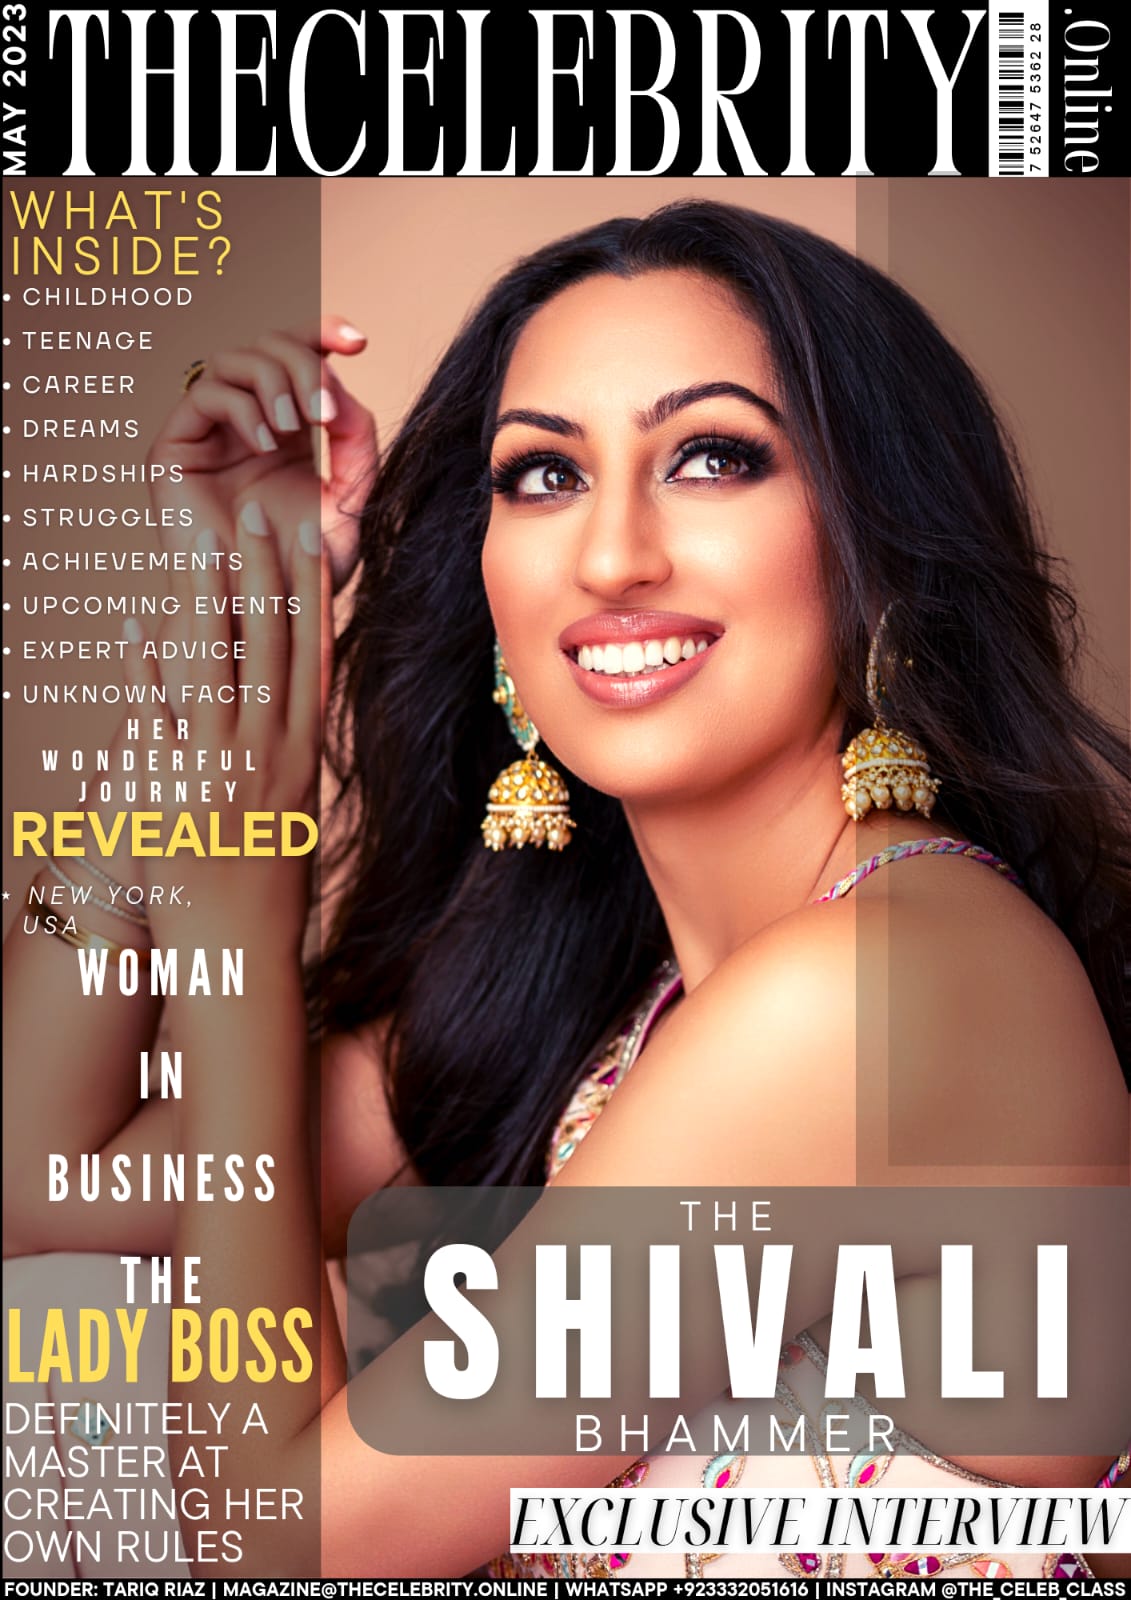 Shivali Bhammer Exclusive Interview – ‘Life is incredibly short and fragile’